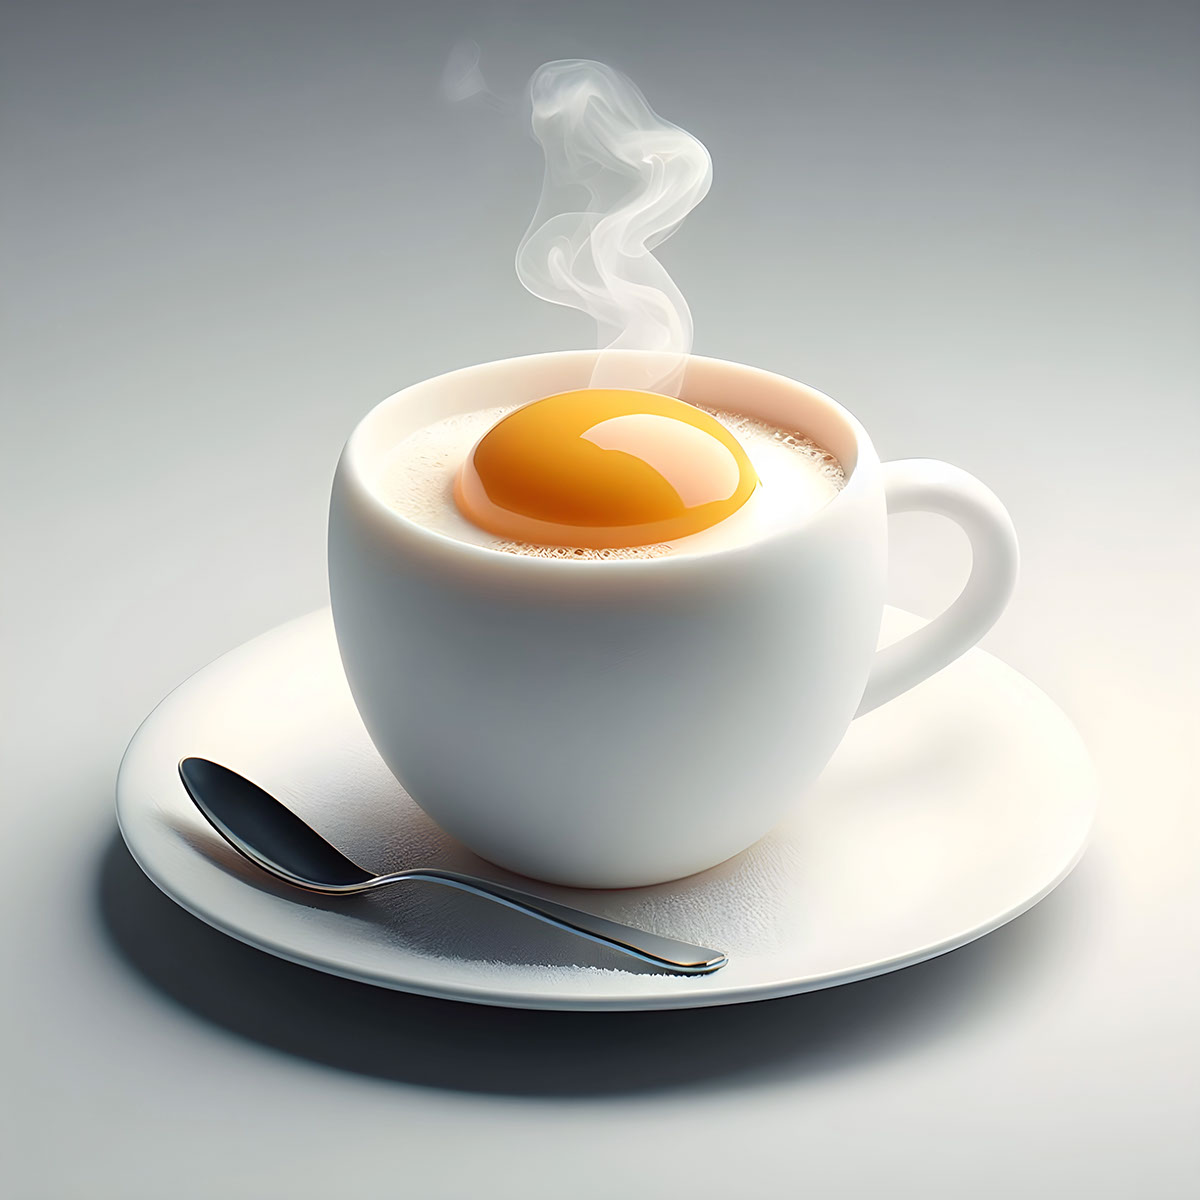 3d fried egg on a plate rendition image